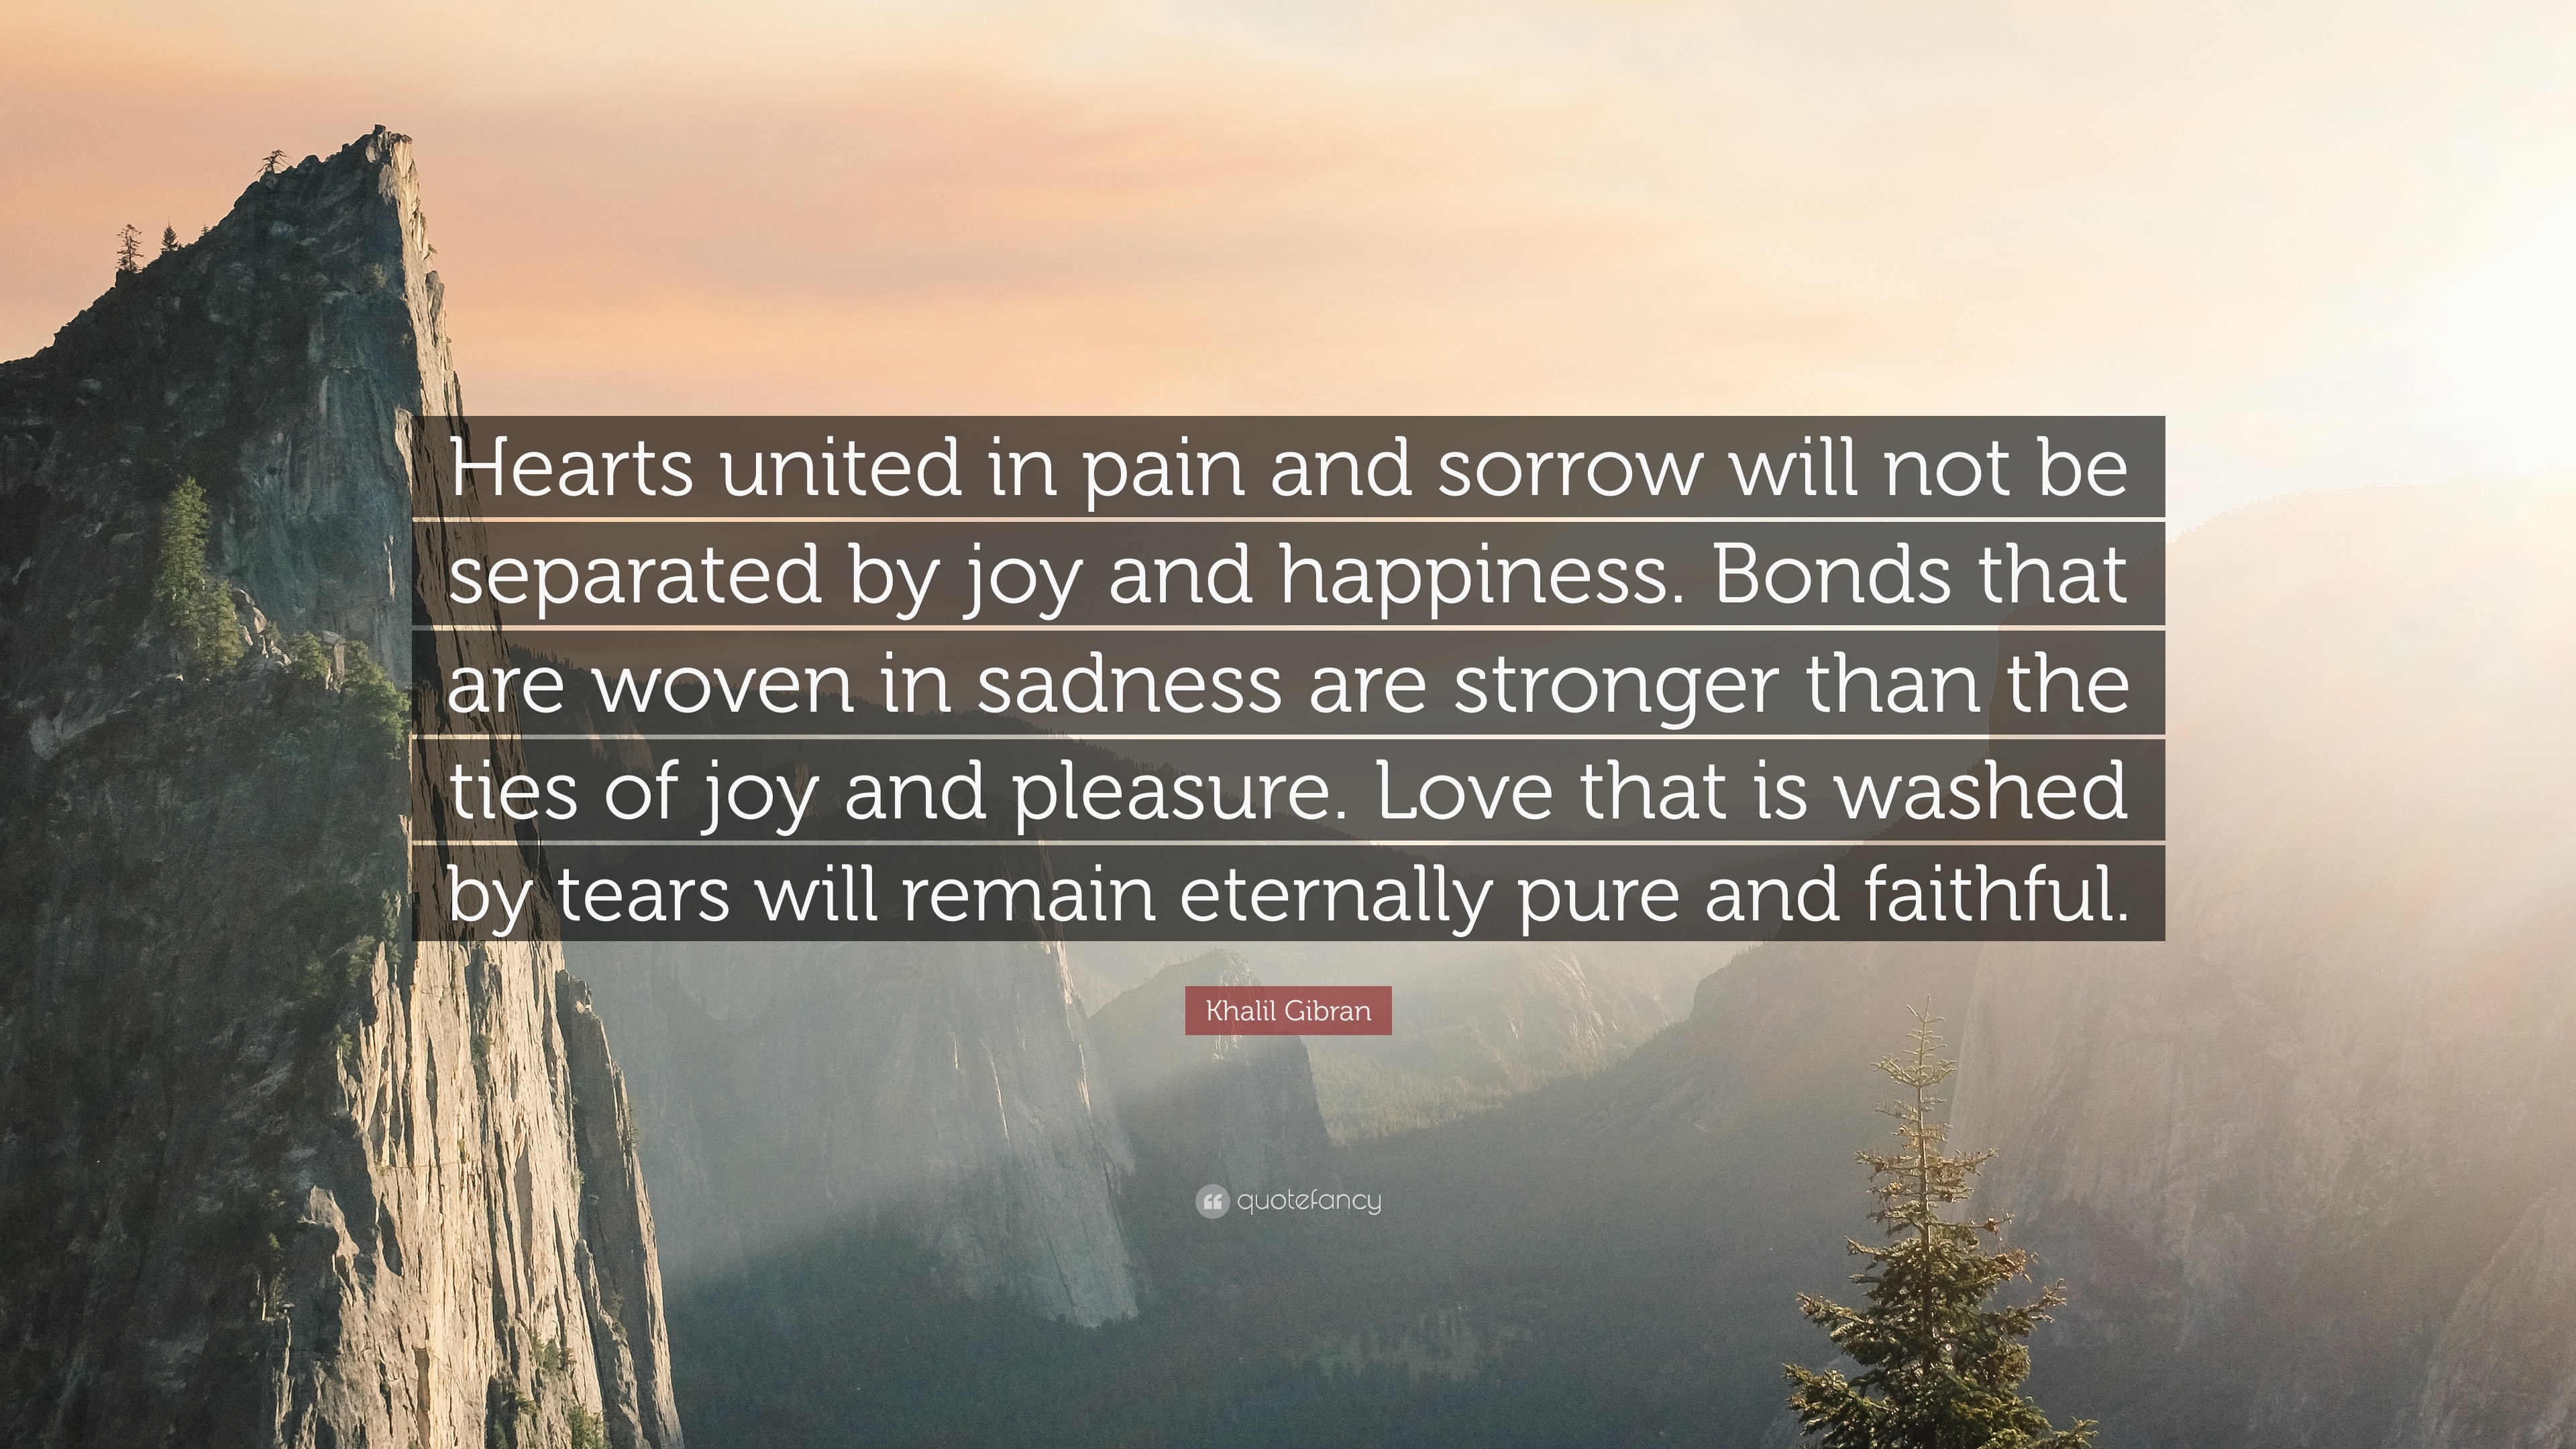 Khalil Gibran Quote “Hearts united in pain and sorrow will not be separated by